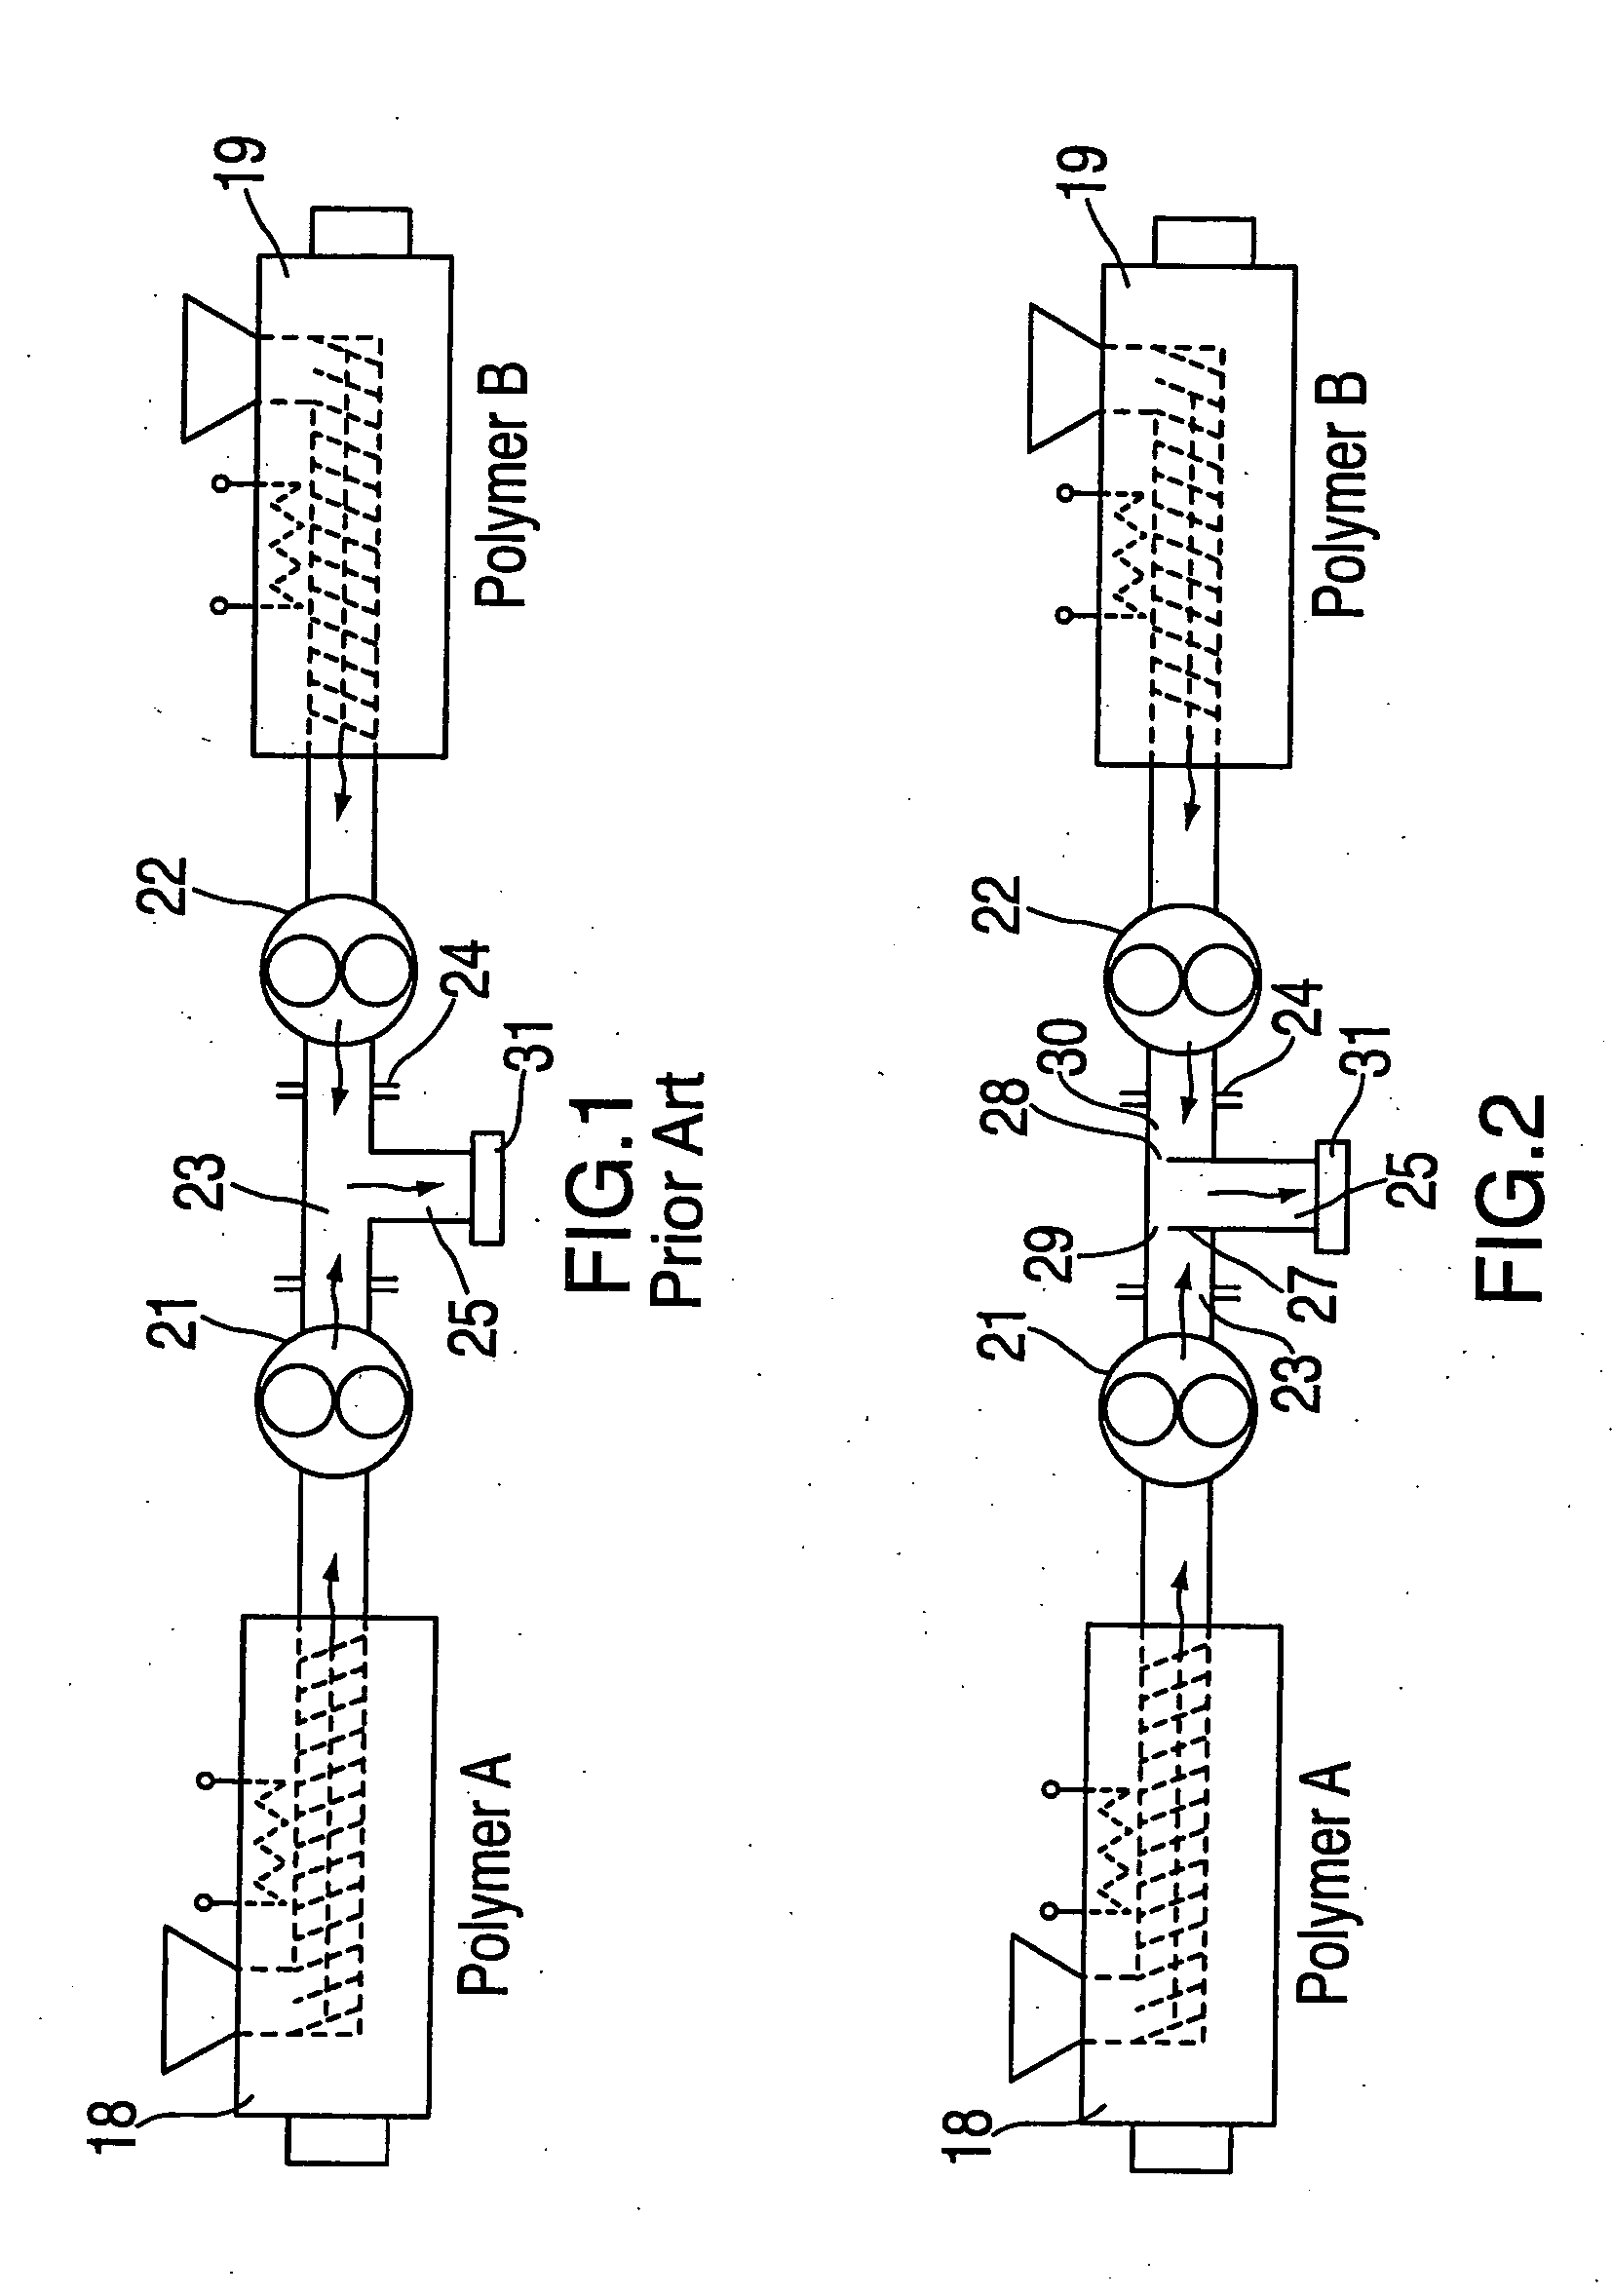 Alternate polymer extrusion method with reduced drool